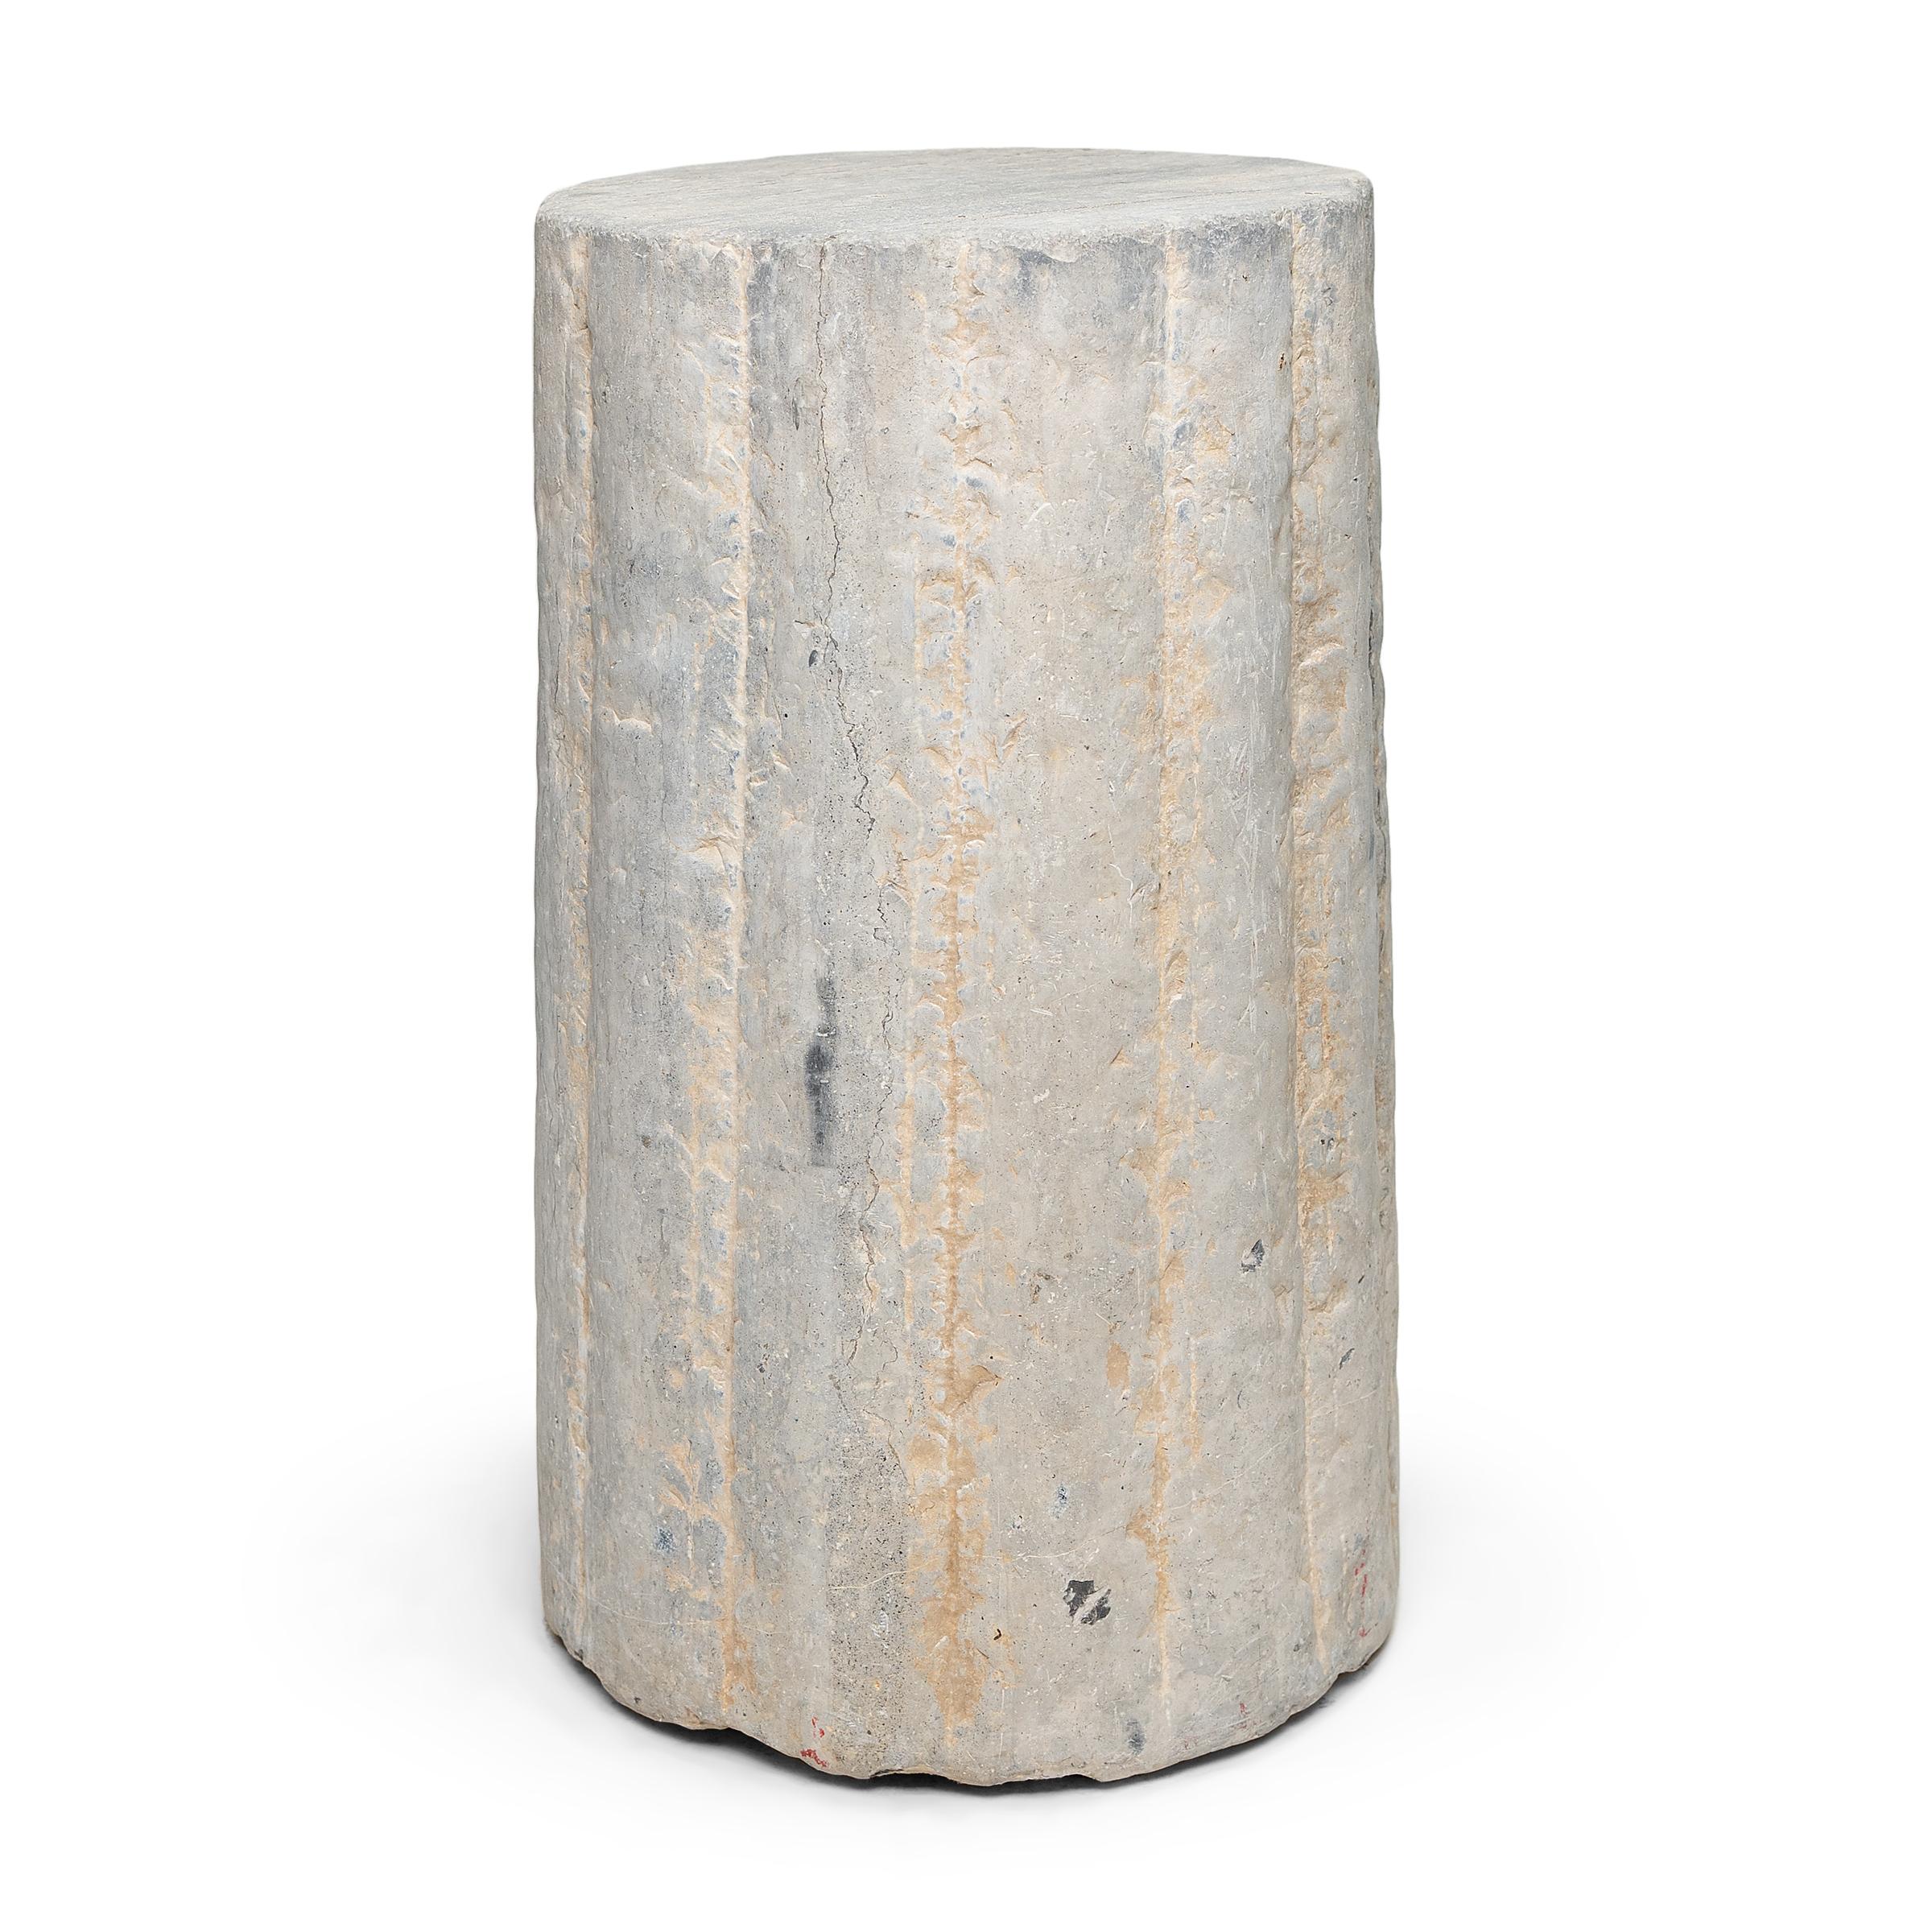 This unusual stone pedestal is actually a late 19th century cylindrical mill stone. hand carved of solid limestone with a textured and ribbed surface, the stone was used for threshing wheat and other grains on a farm in China's Shanxi province. The